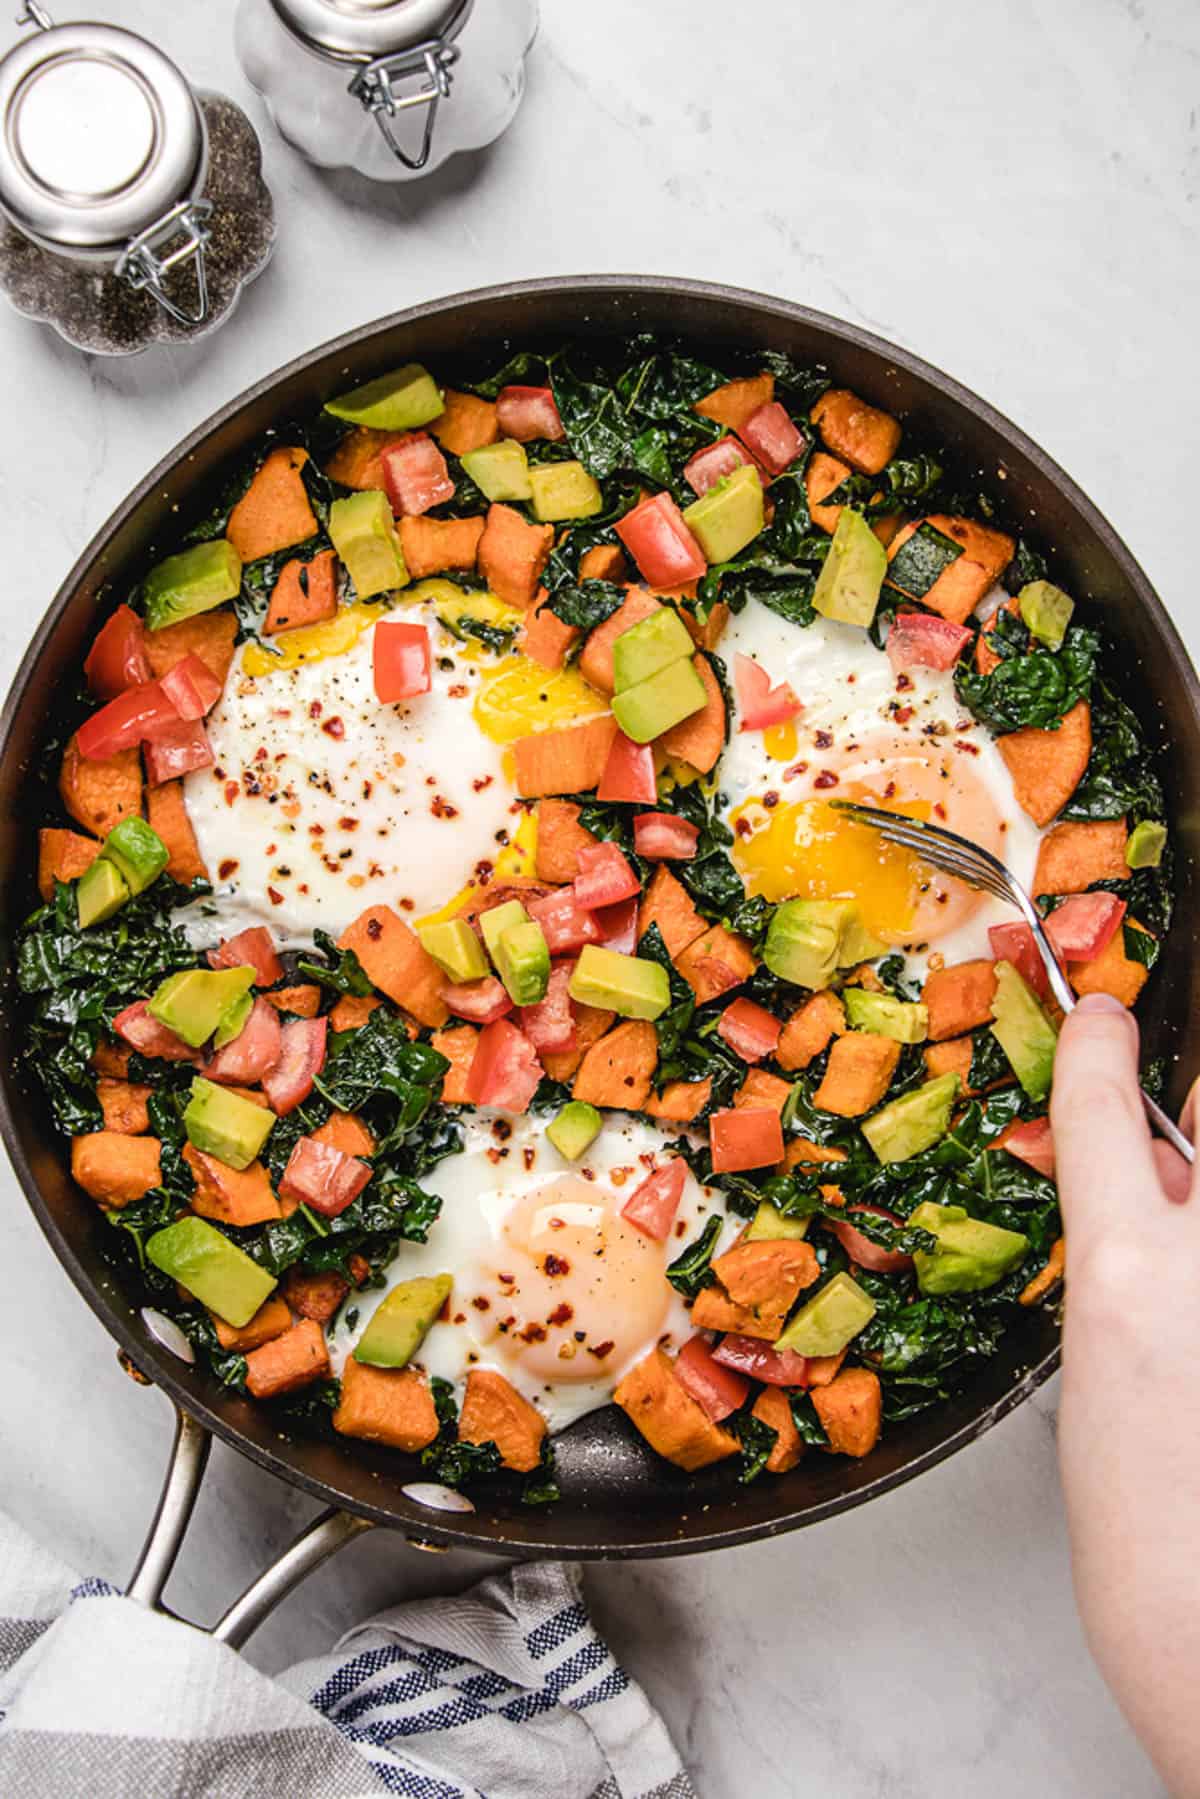 Breakfast hash in a skillet with veggies and eggs.